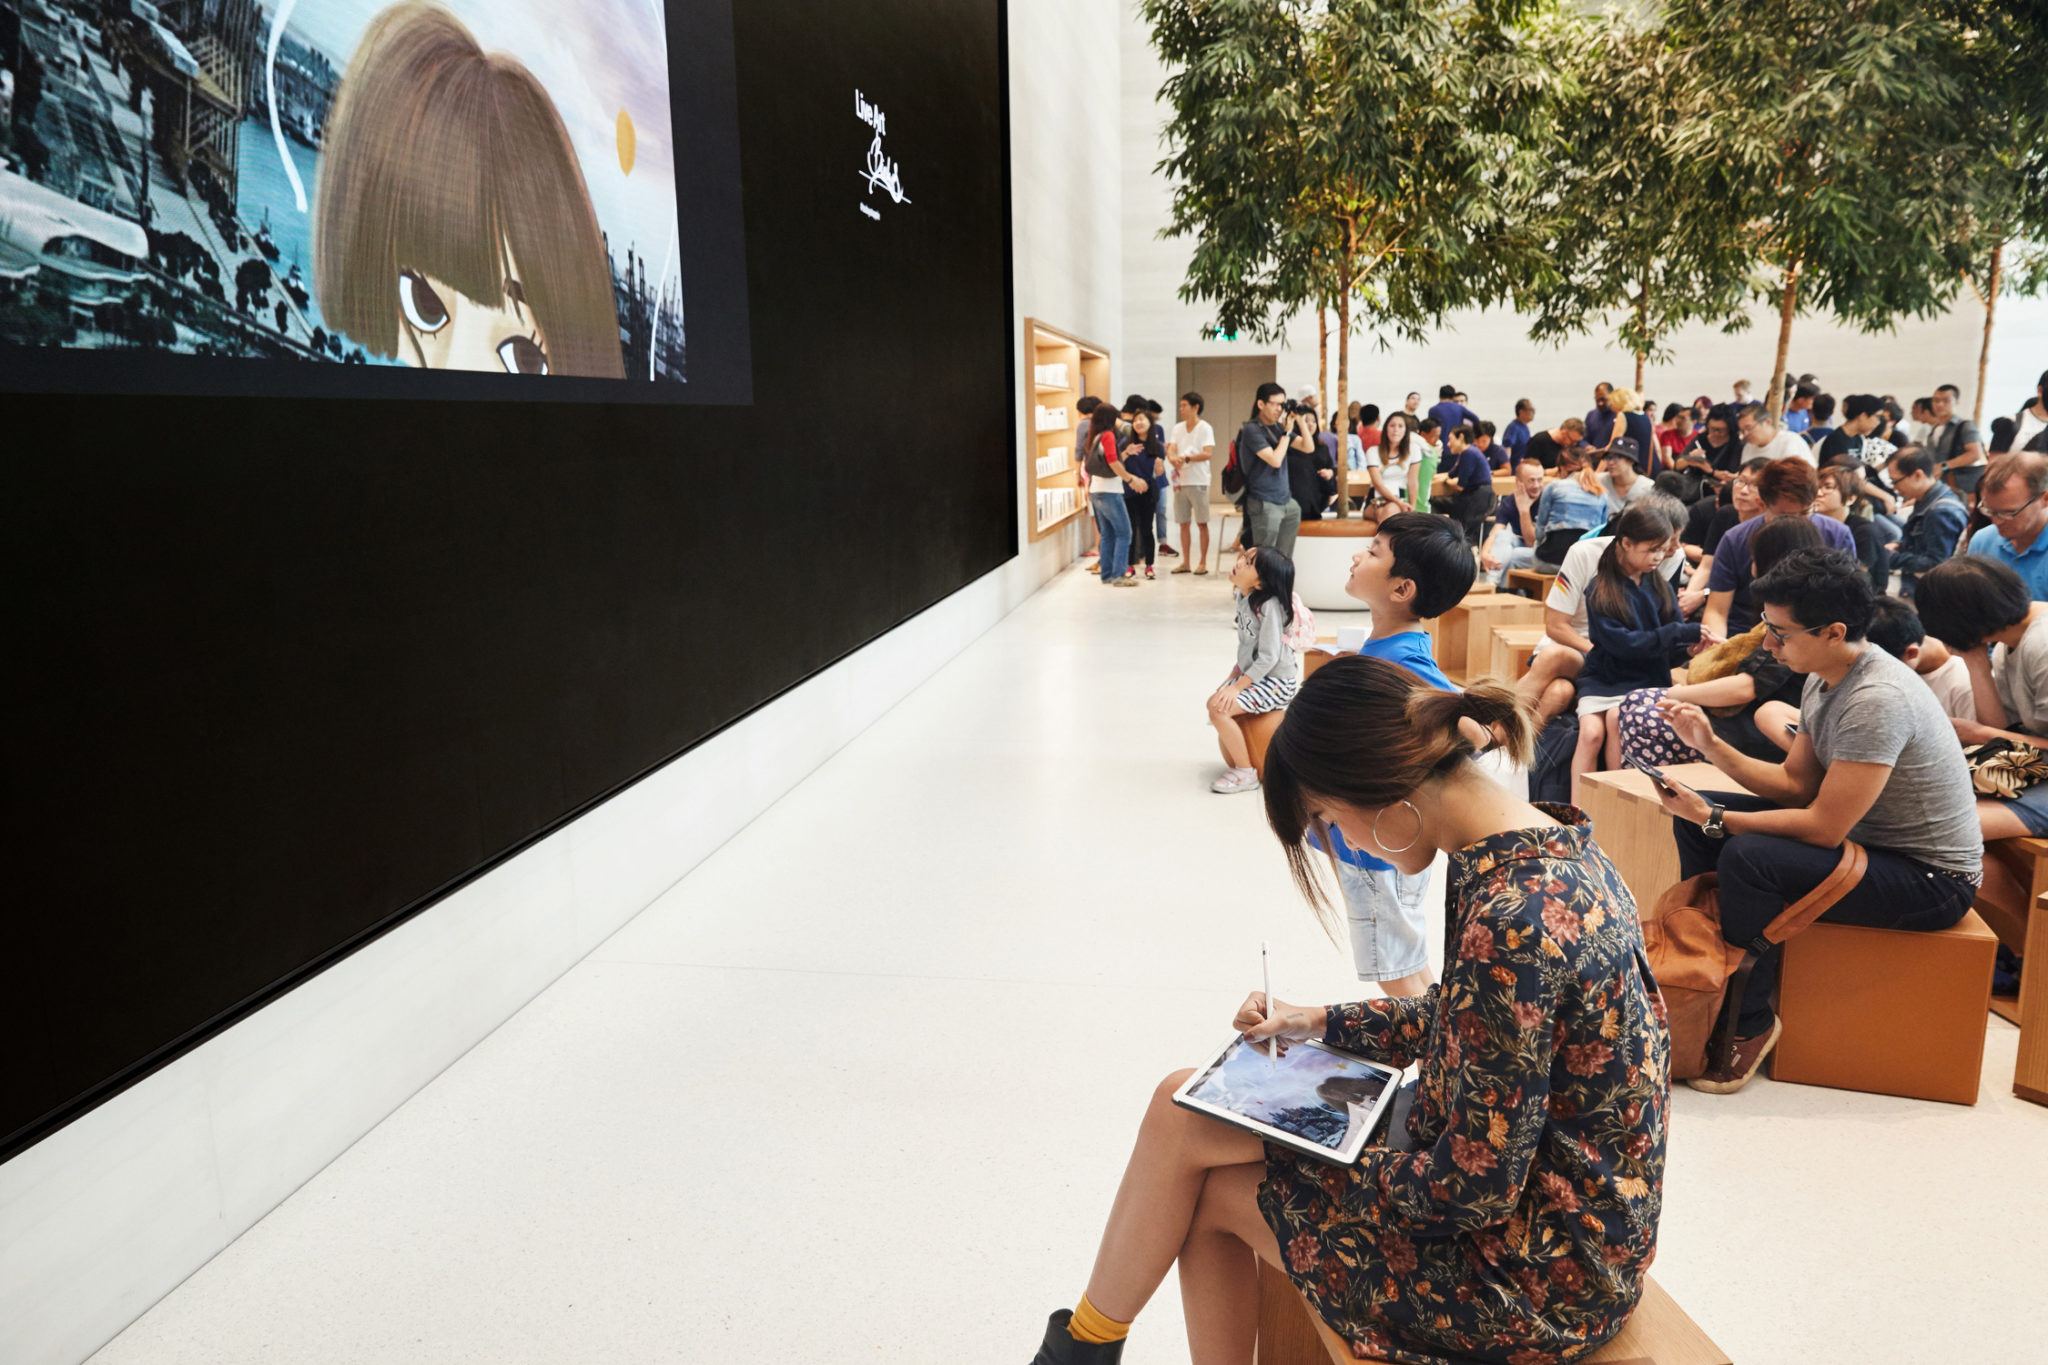 Building Up: Apple's Retail Stores are Now a Community Hub